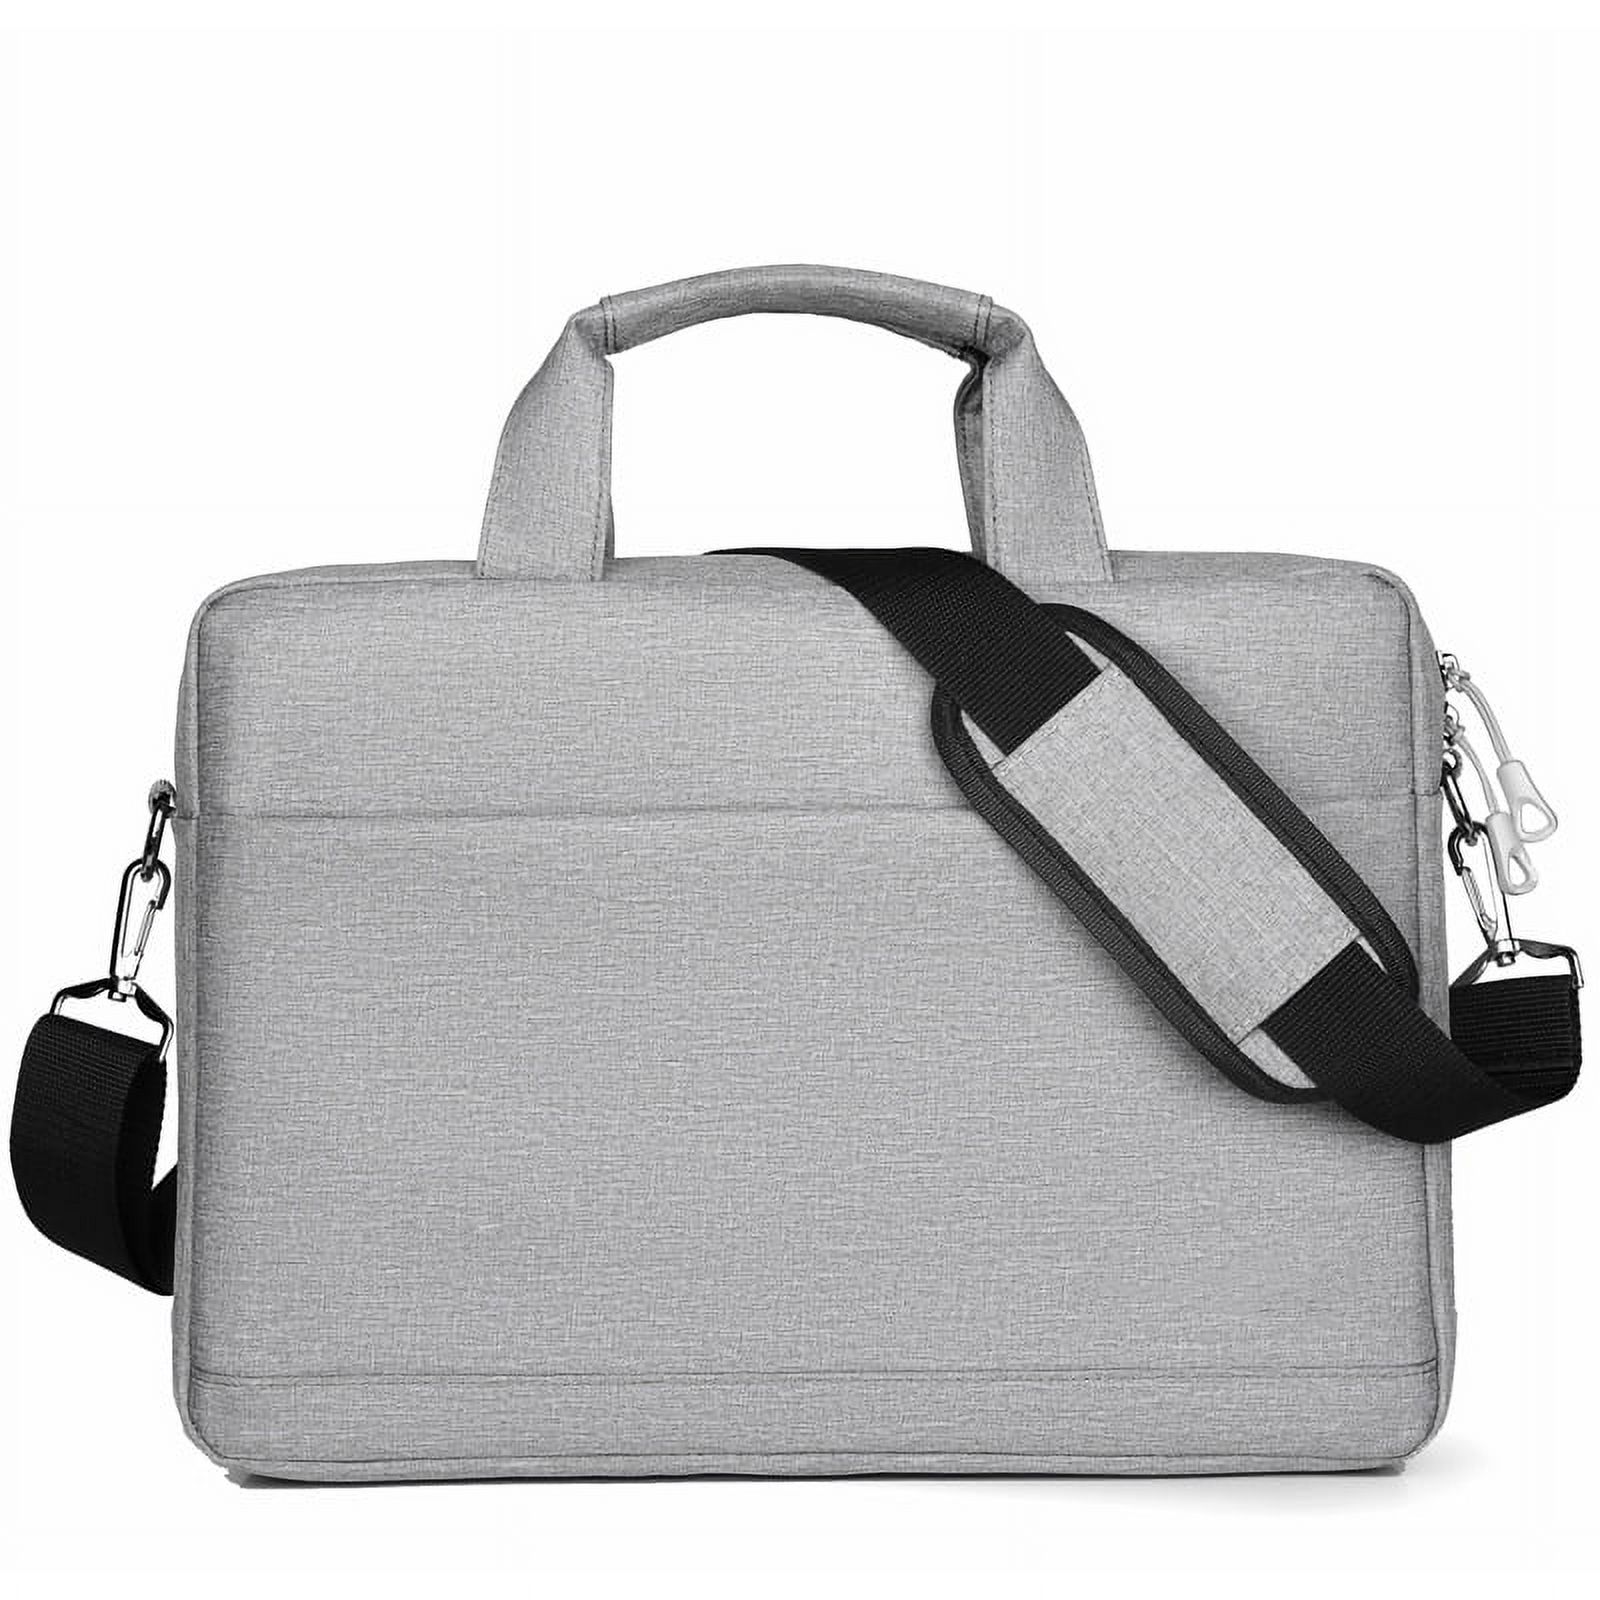 Laptop Bag Carrying Case Briefcase Waterproof Oxford Cloth Large ...